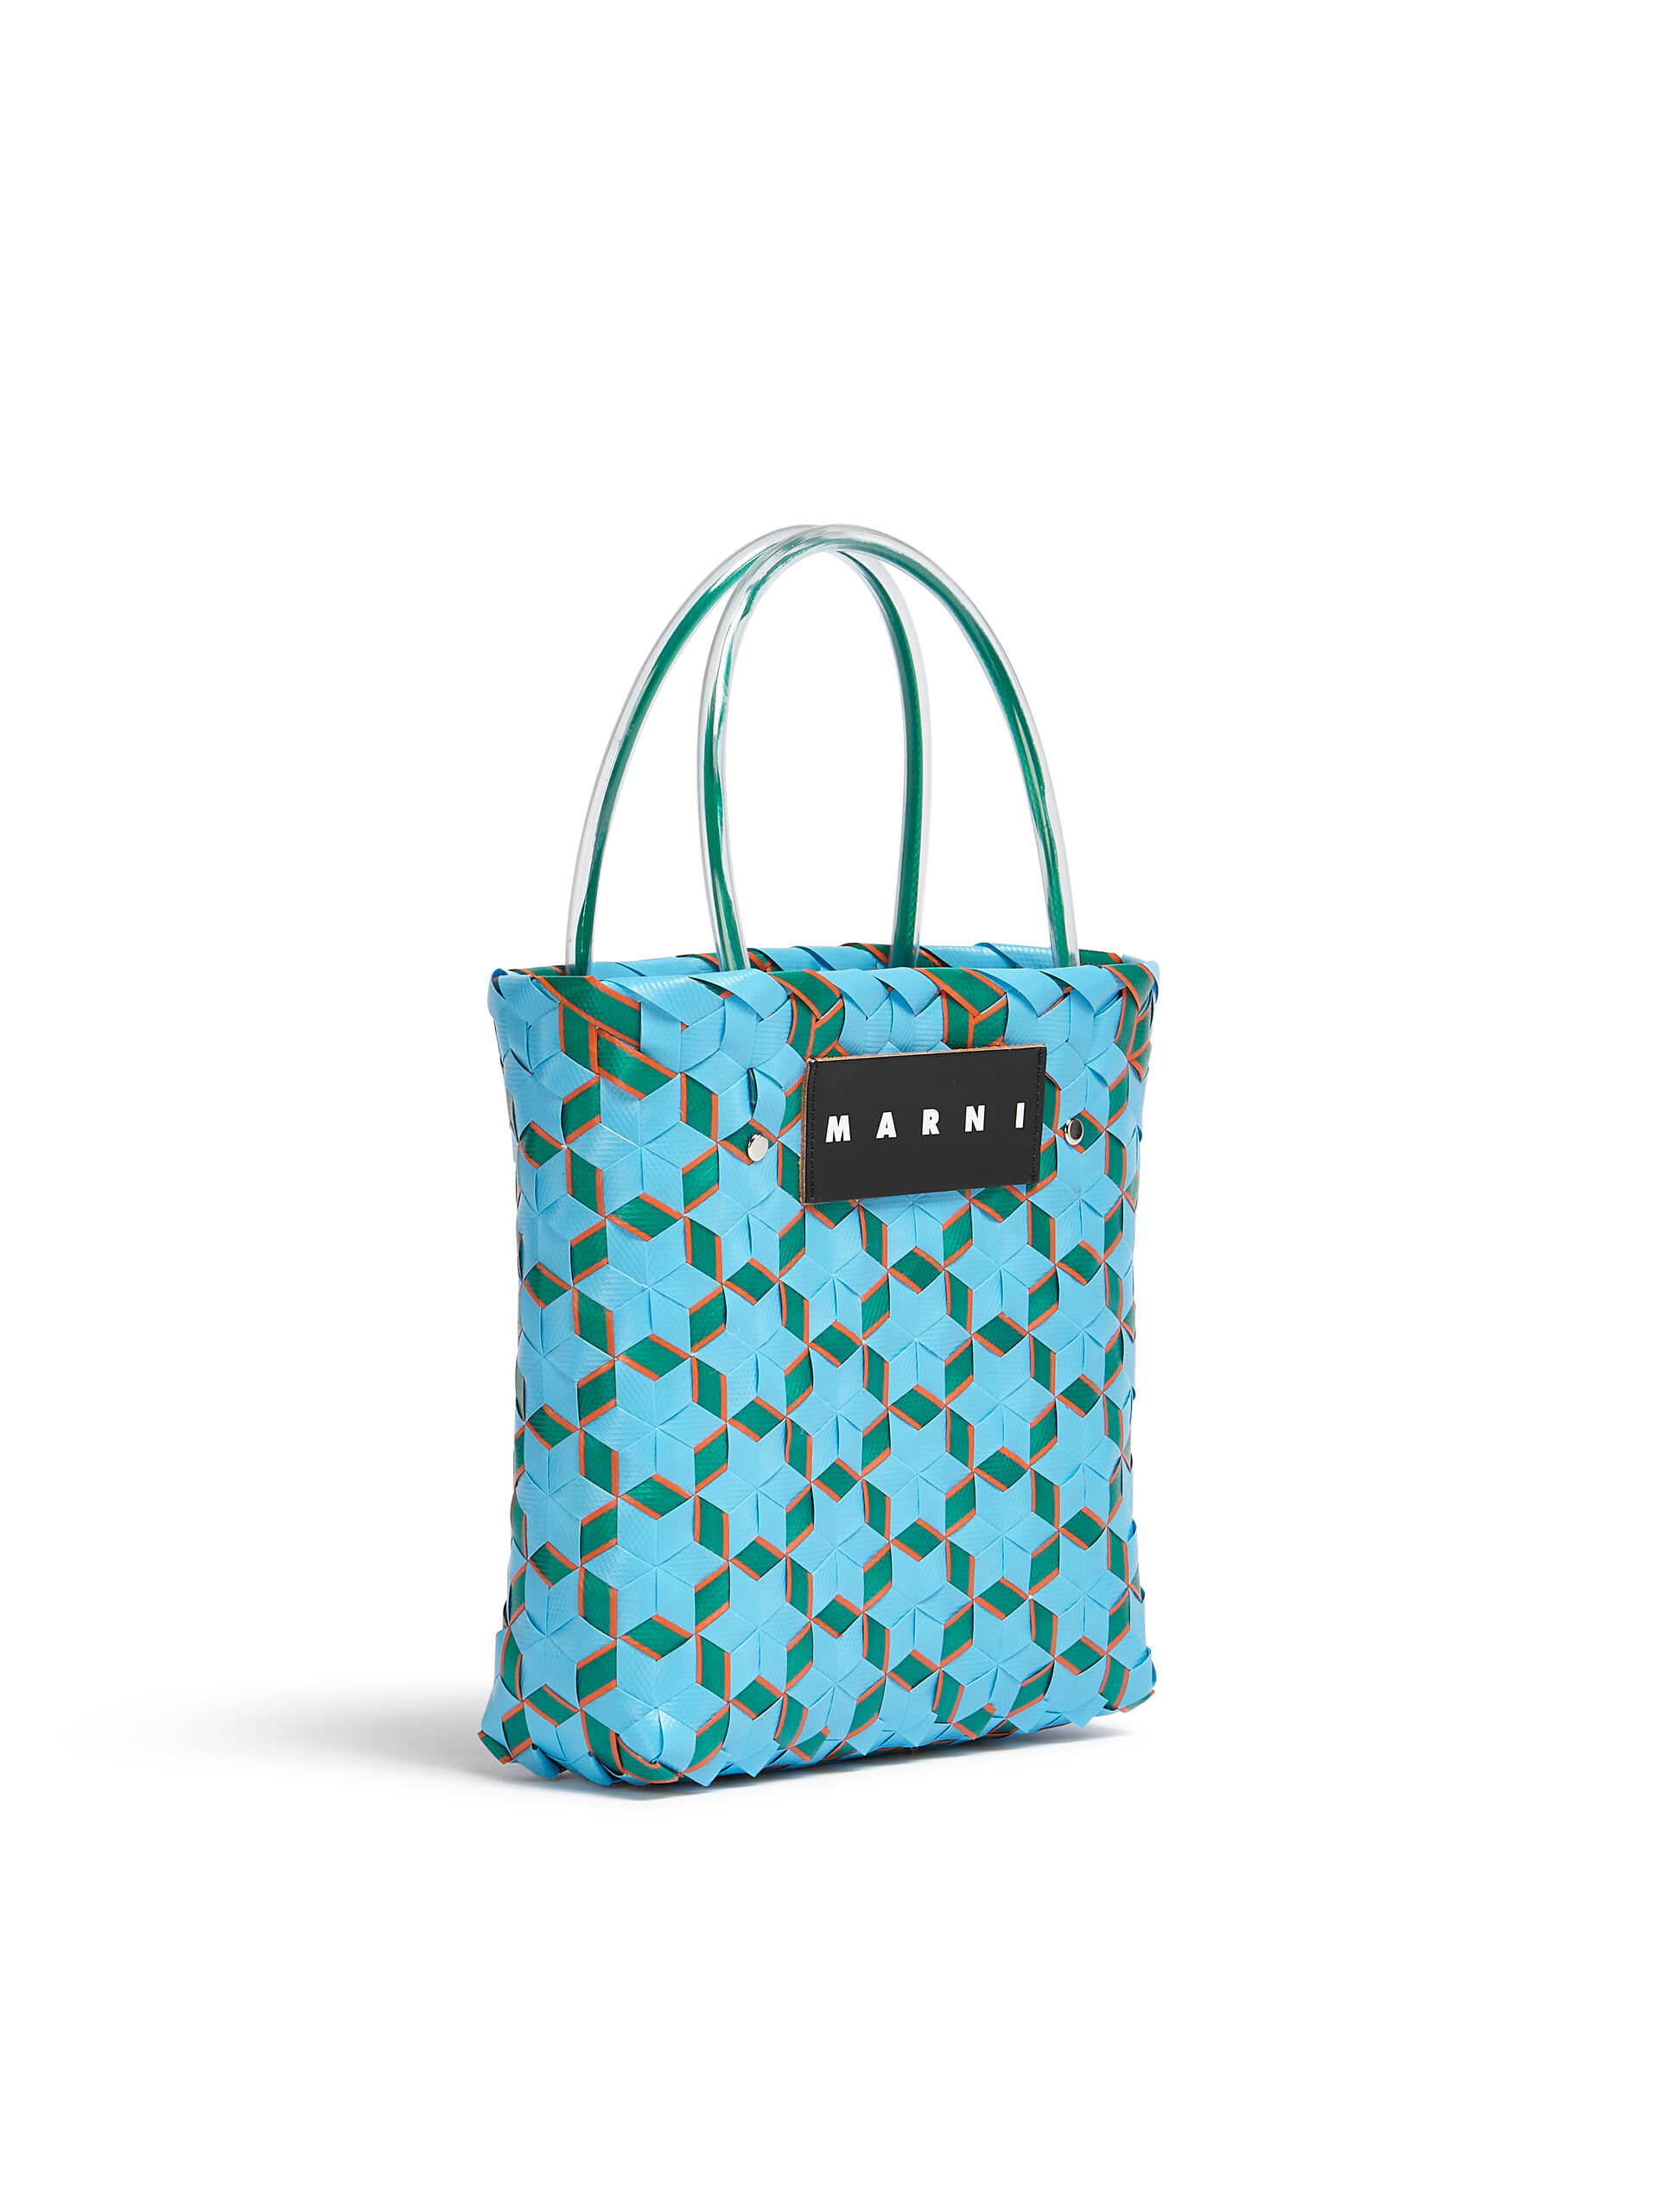 MARNI MARKET bag in pale blue star woven material - Bags - Image 2